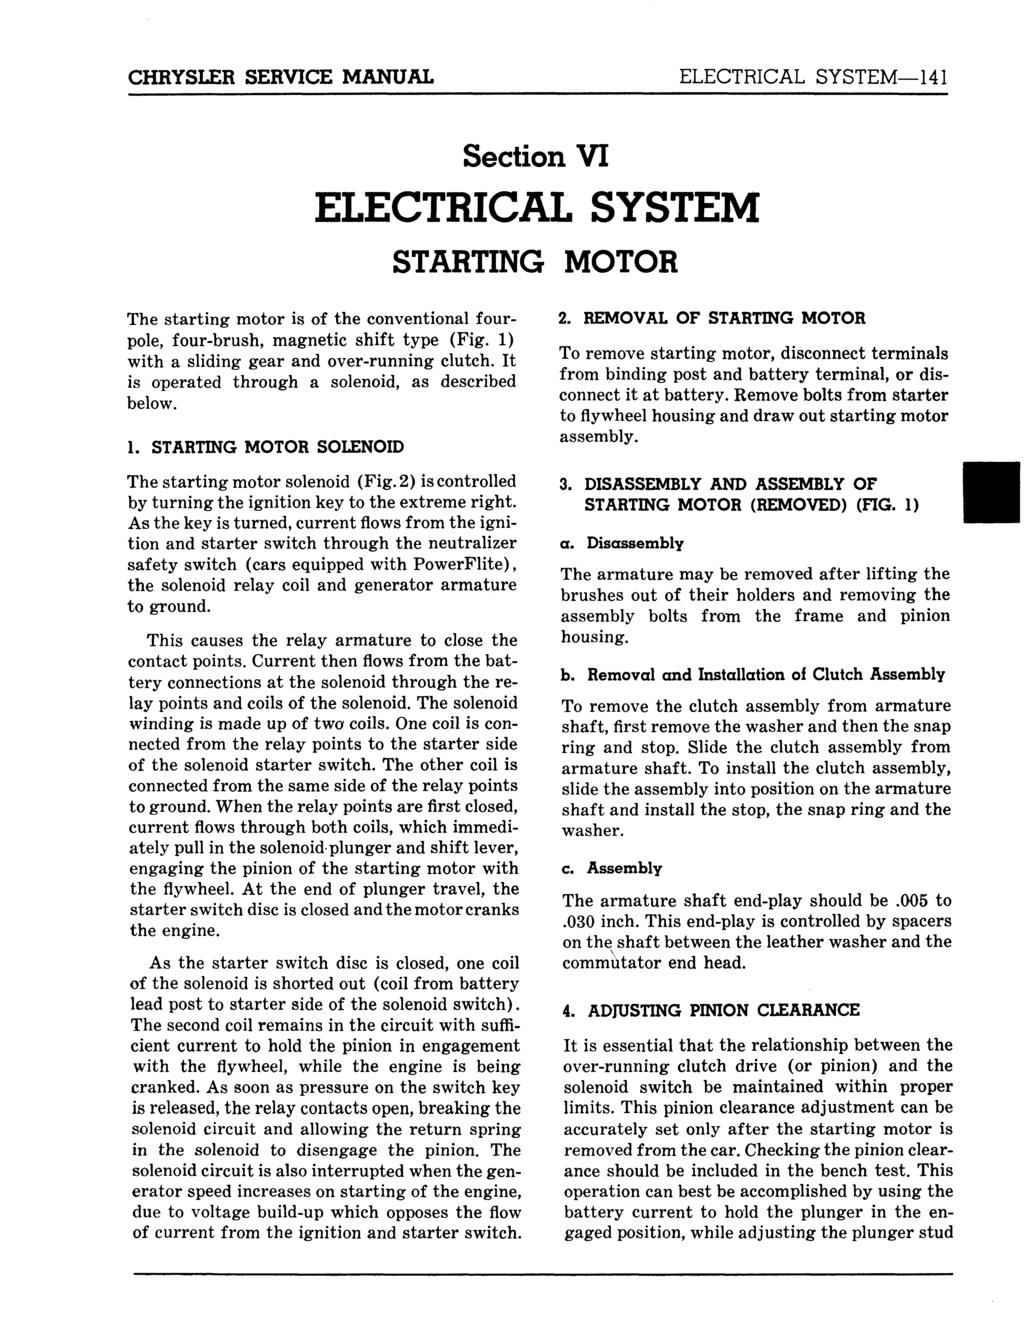 CHRYSLER SERVICE MANUAL ELECTRICAL SYSTEM 141 Section VI ELECTRICAL SYSTEM STARTING MOTOR The starting motor is of the conventional fourpole, four-brush, magnetic shift type (Fig.